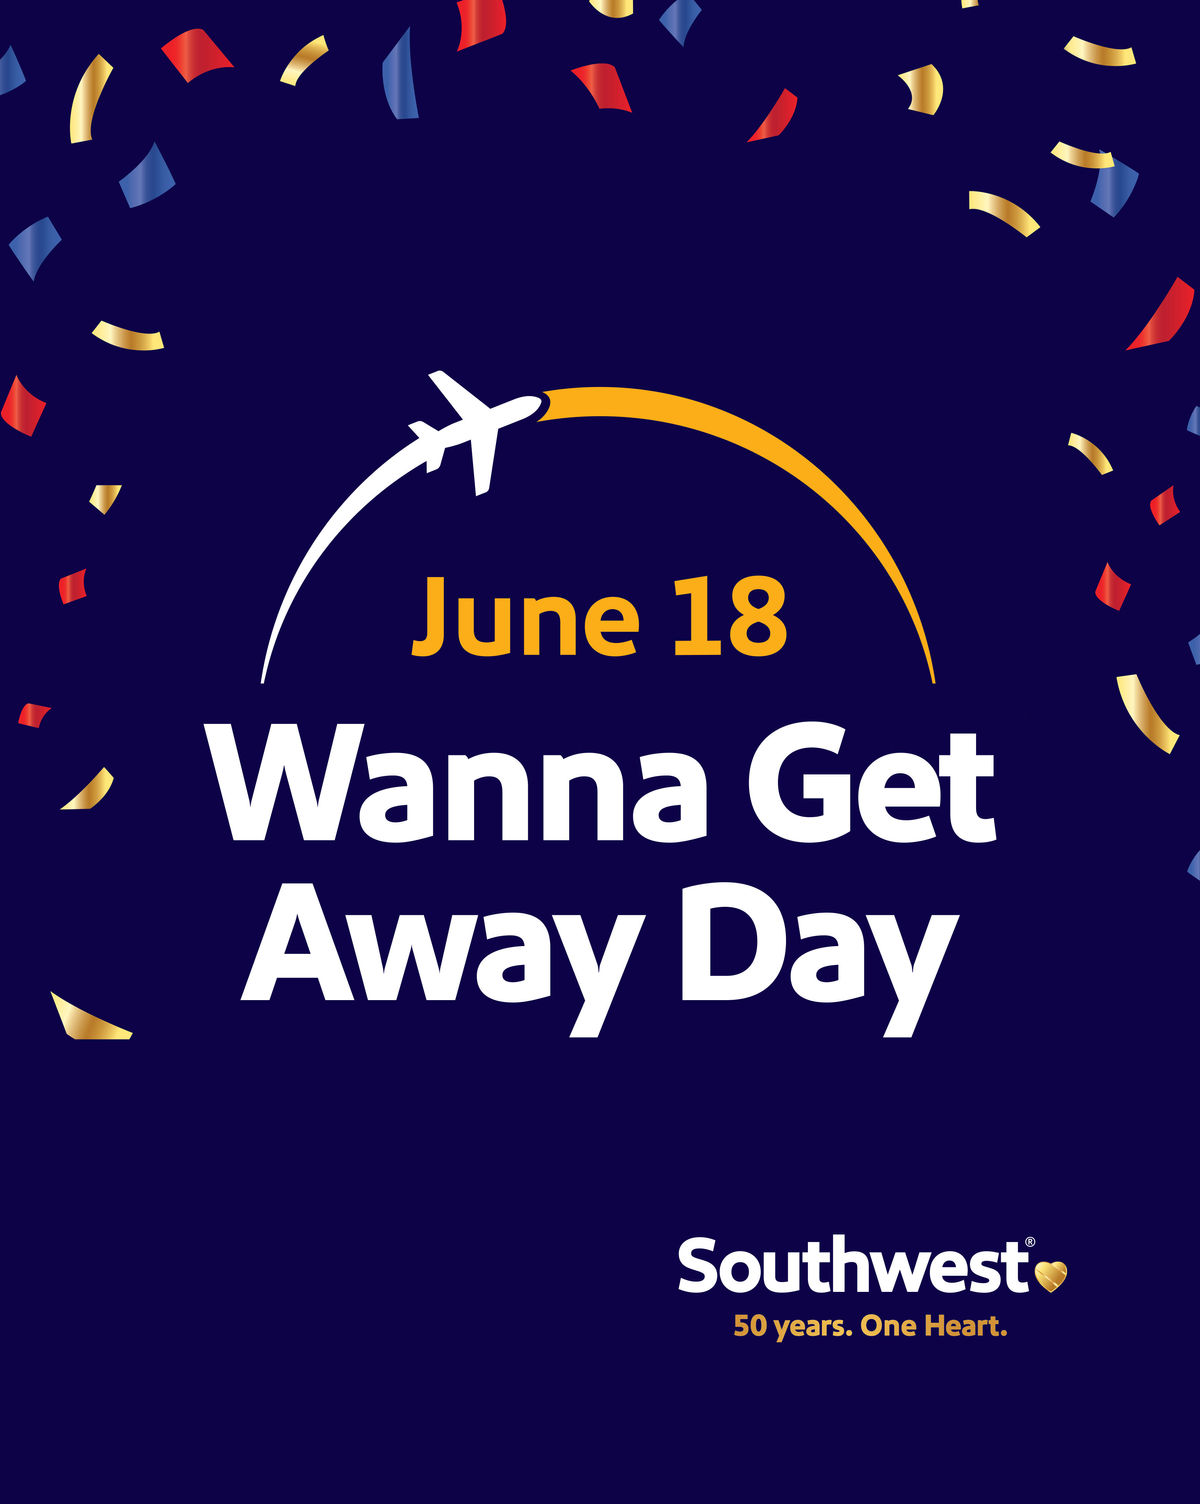 Southwest Airlines Announces FirstEver 'Wanna Get Away Day' TravelPulse